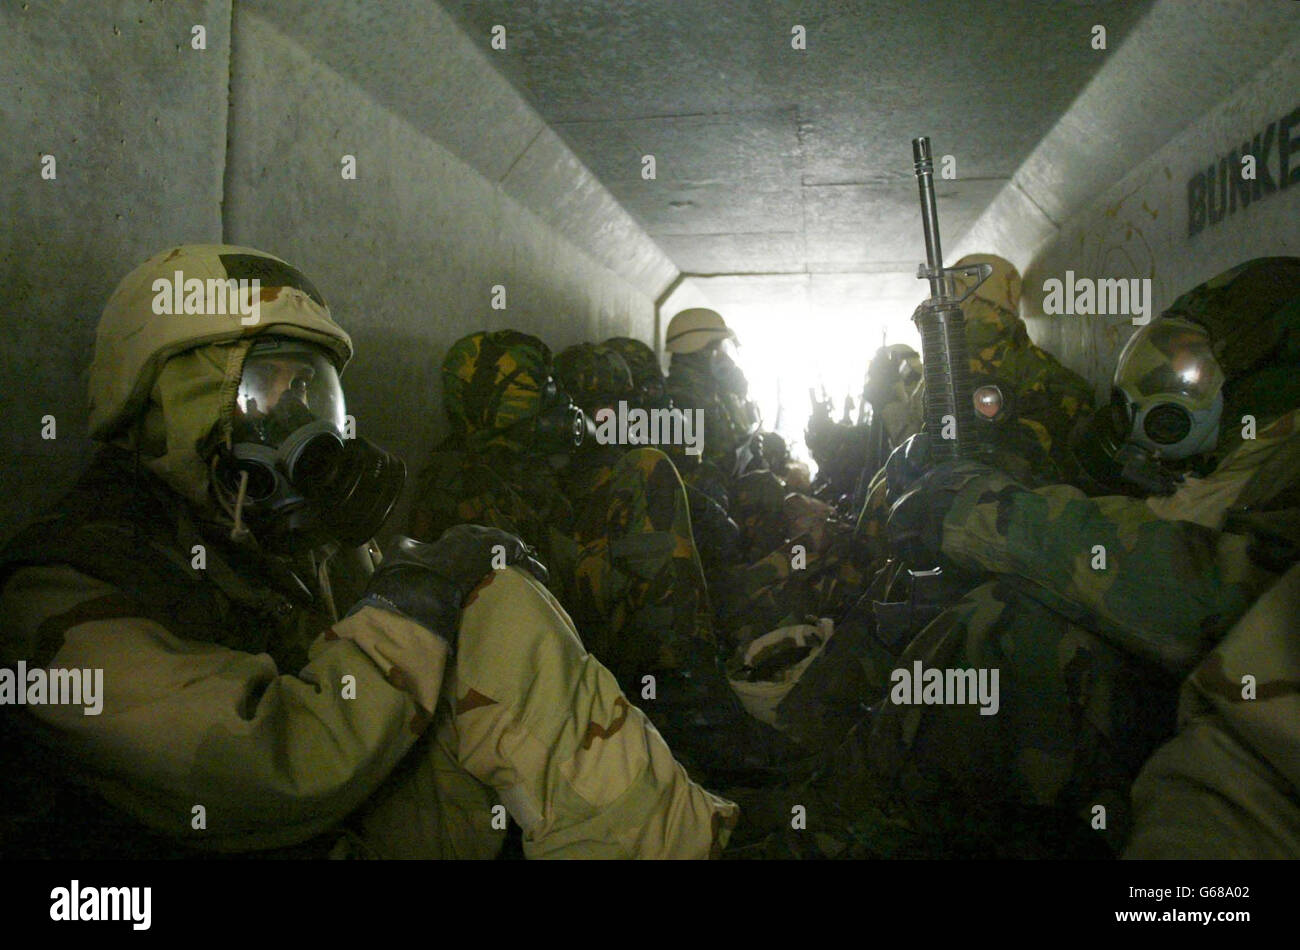 U.S. troops wait in full nuclear biological and chemical protection suits in a bunker at their base in the Kuwait desert after a warning of a second scud missile attack from Iraq. * Iraq fired missiles at Kuwait, prompting U.S. troops to don chemical protective suits and setting emergency air raid sirens blaring in Kuwait City. Stock Photo